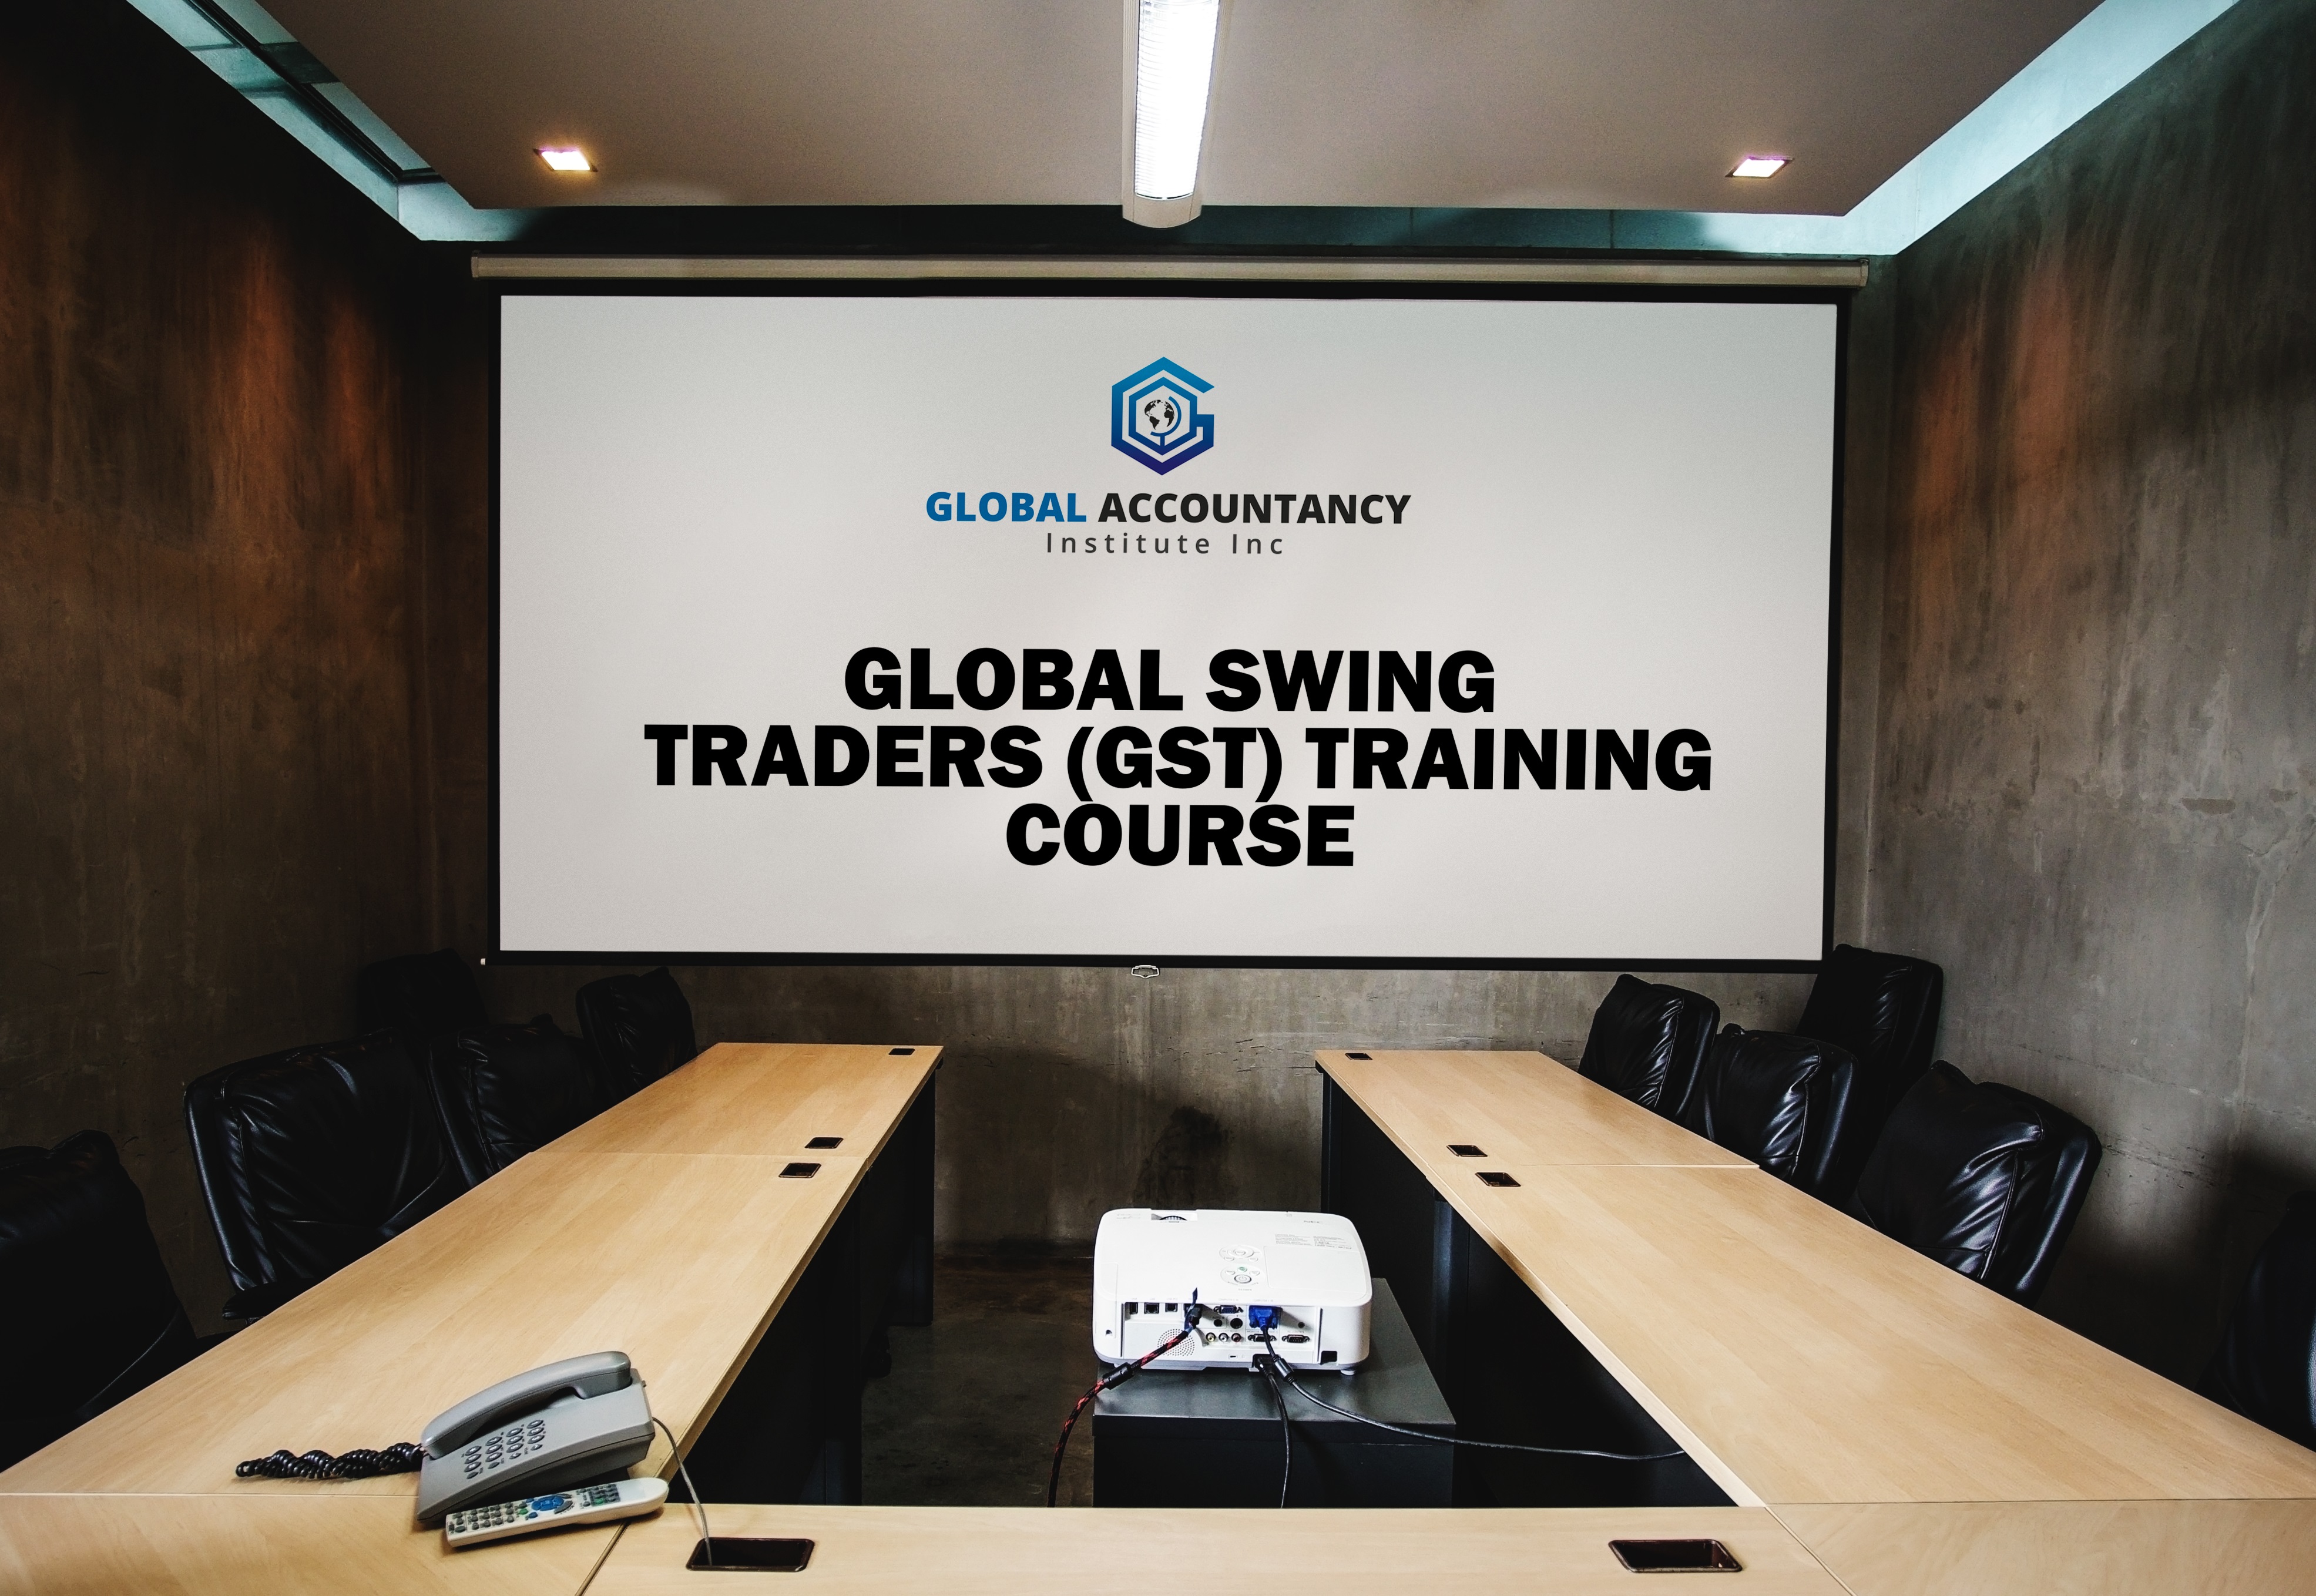 Global Swing Traders (GST) Training Course